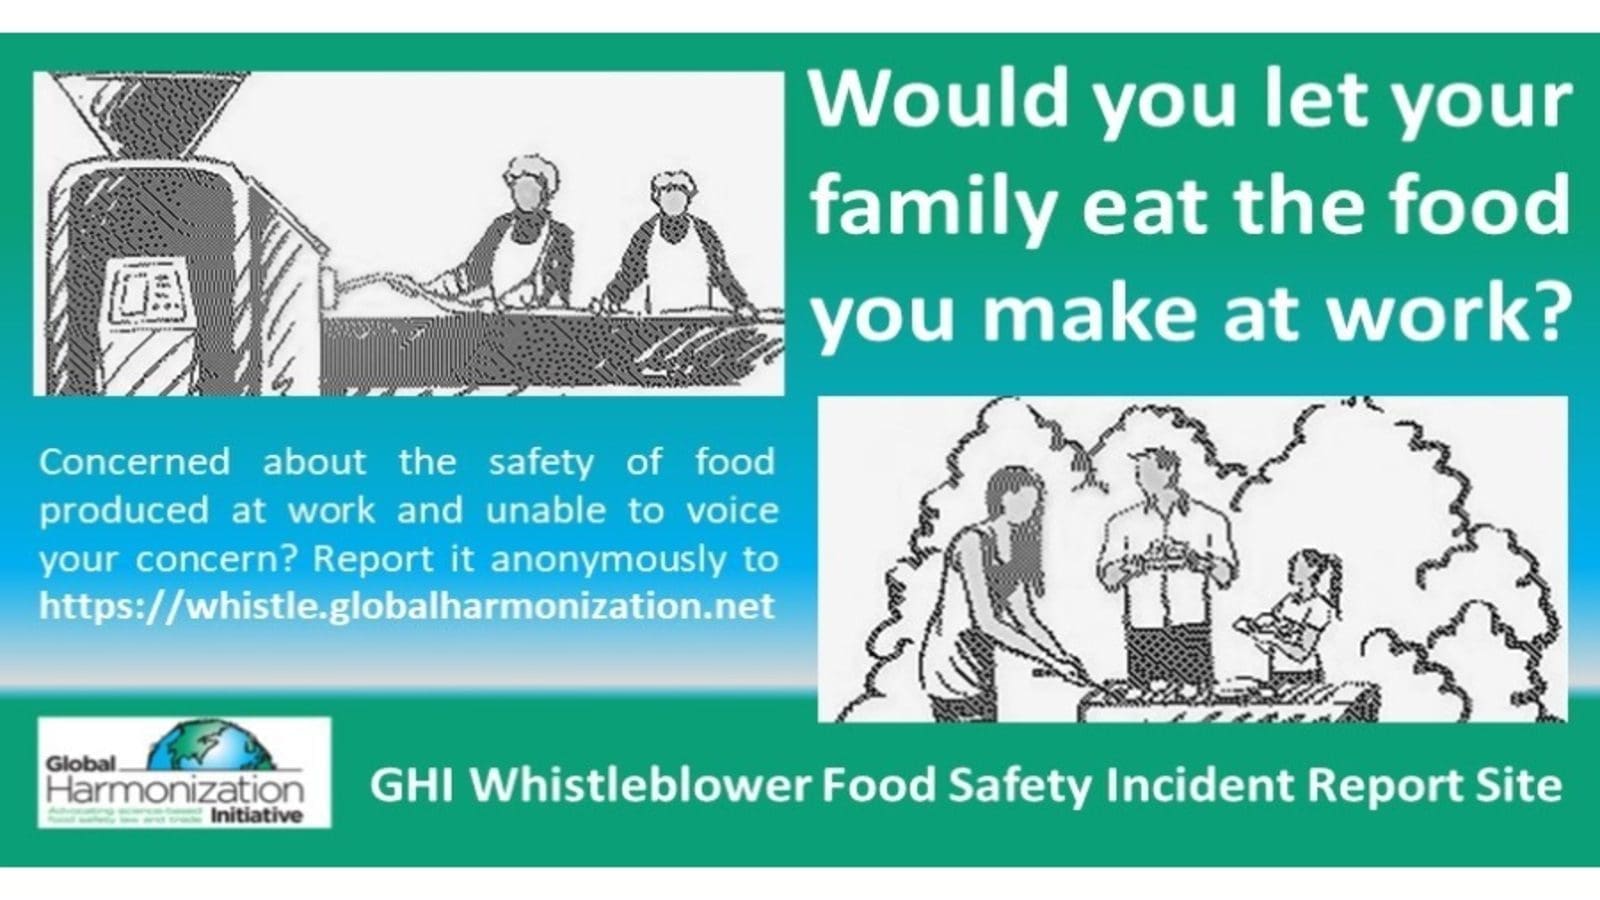 GHI unveils Whistleblower Food Safety Incident Report Site while APAL welcomes Food Safety Culture fact sheet